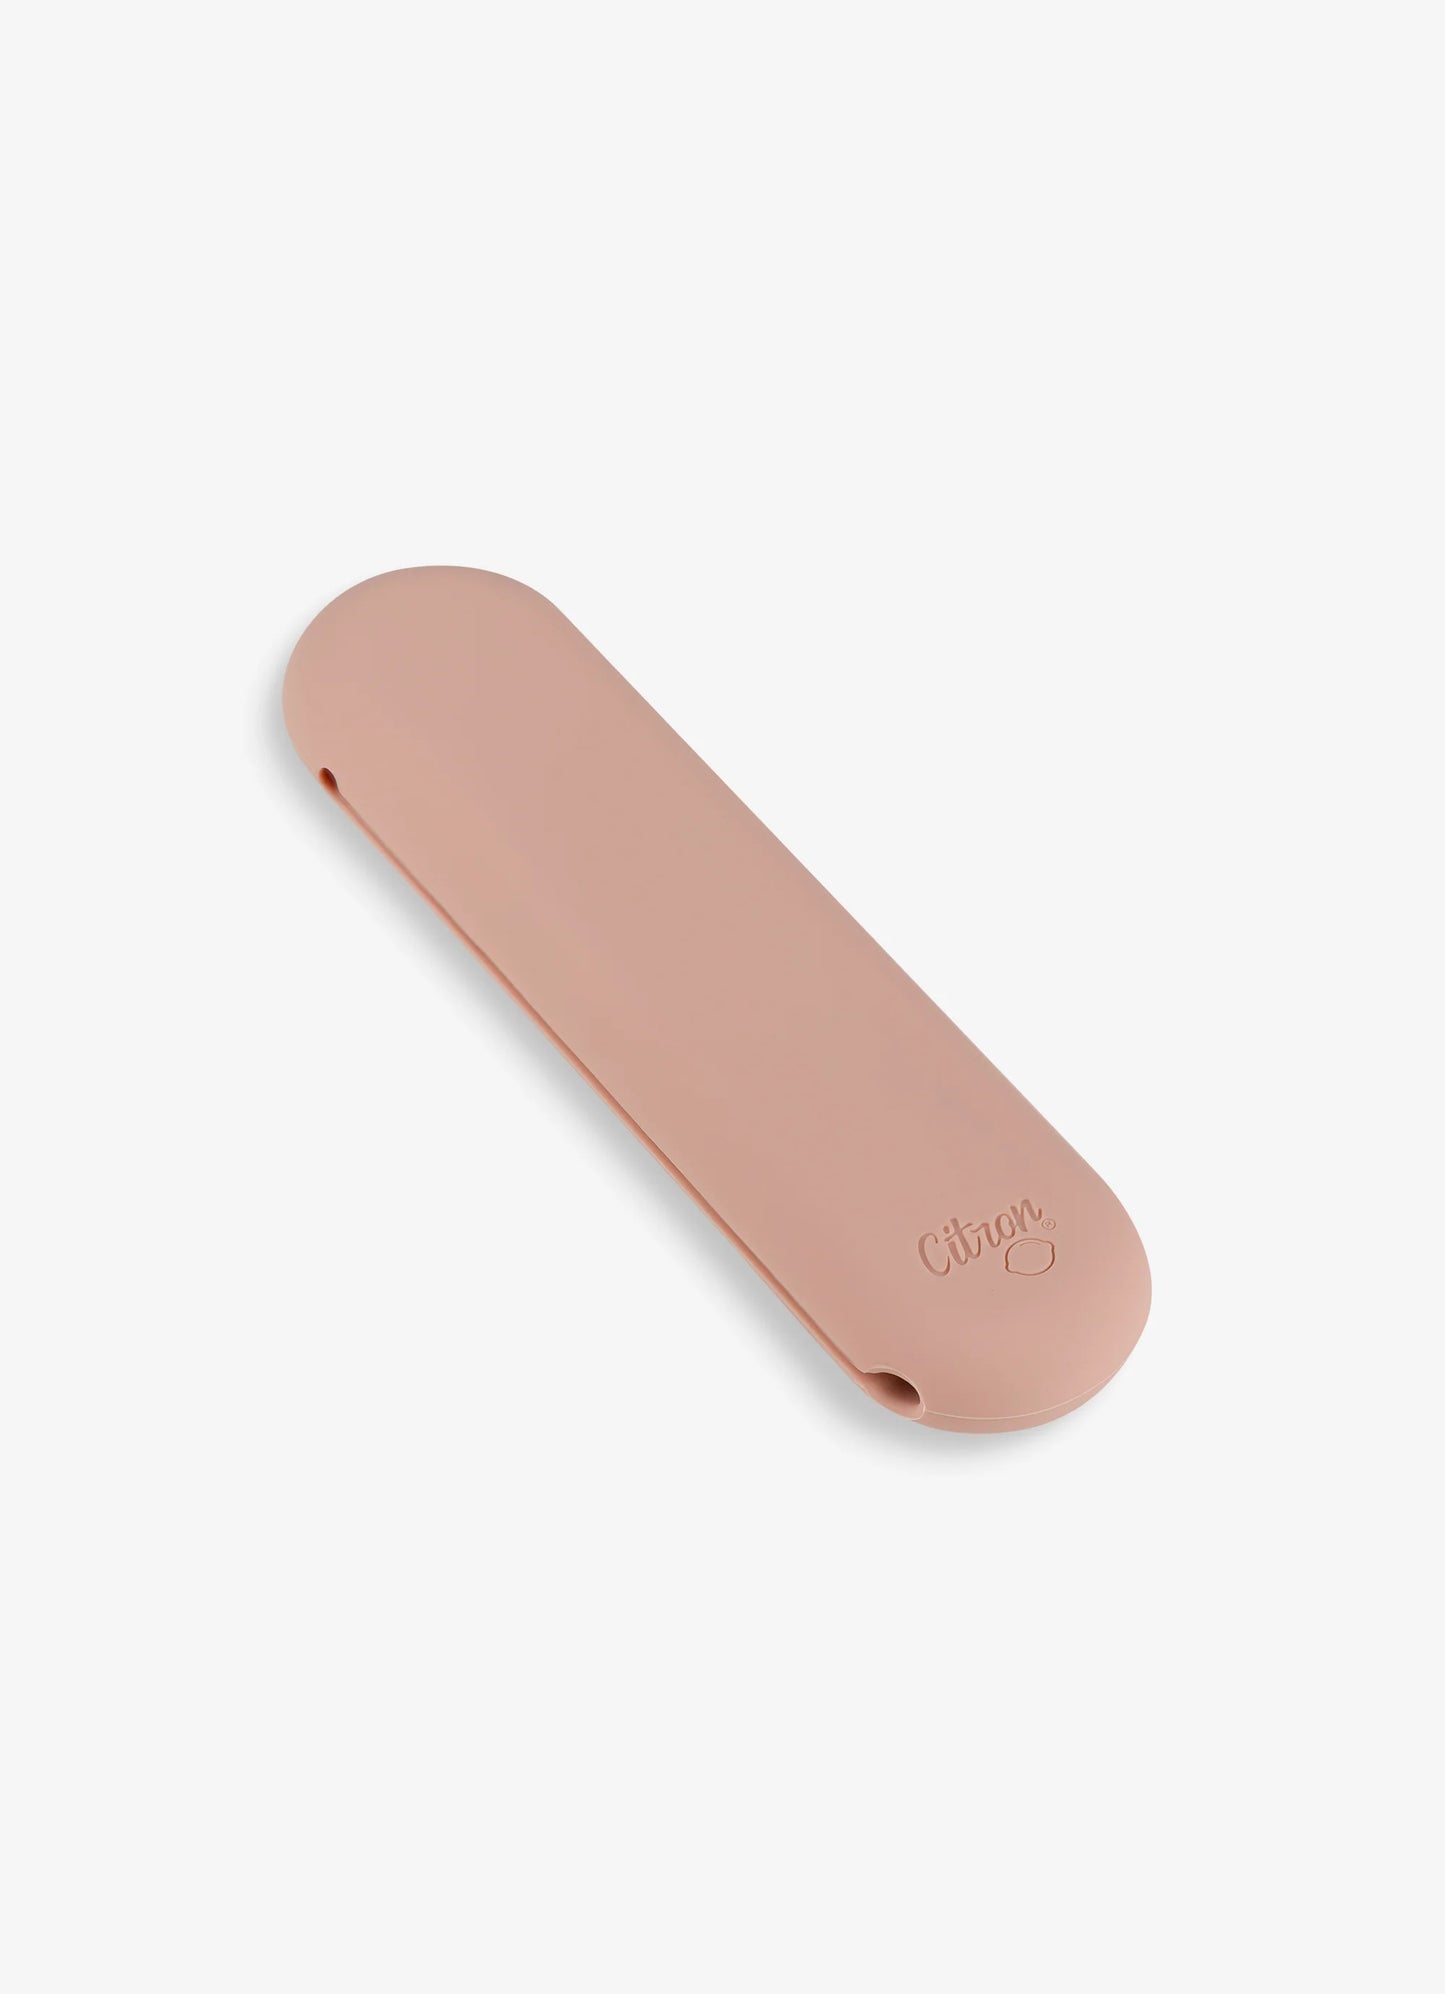 Eco Cutlery Set + Case in Pink/Cream